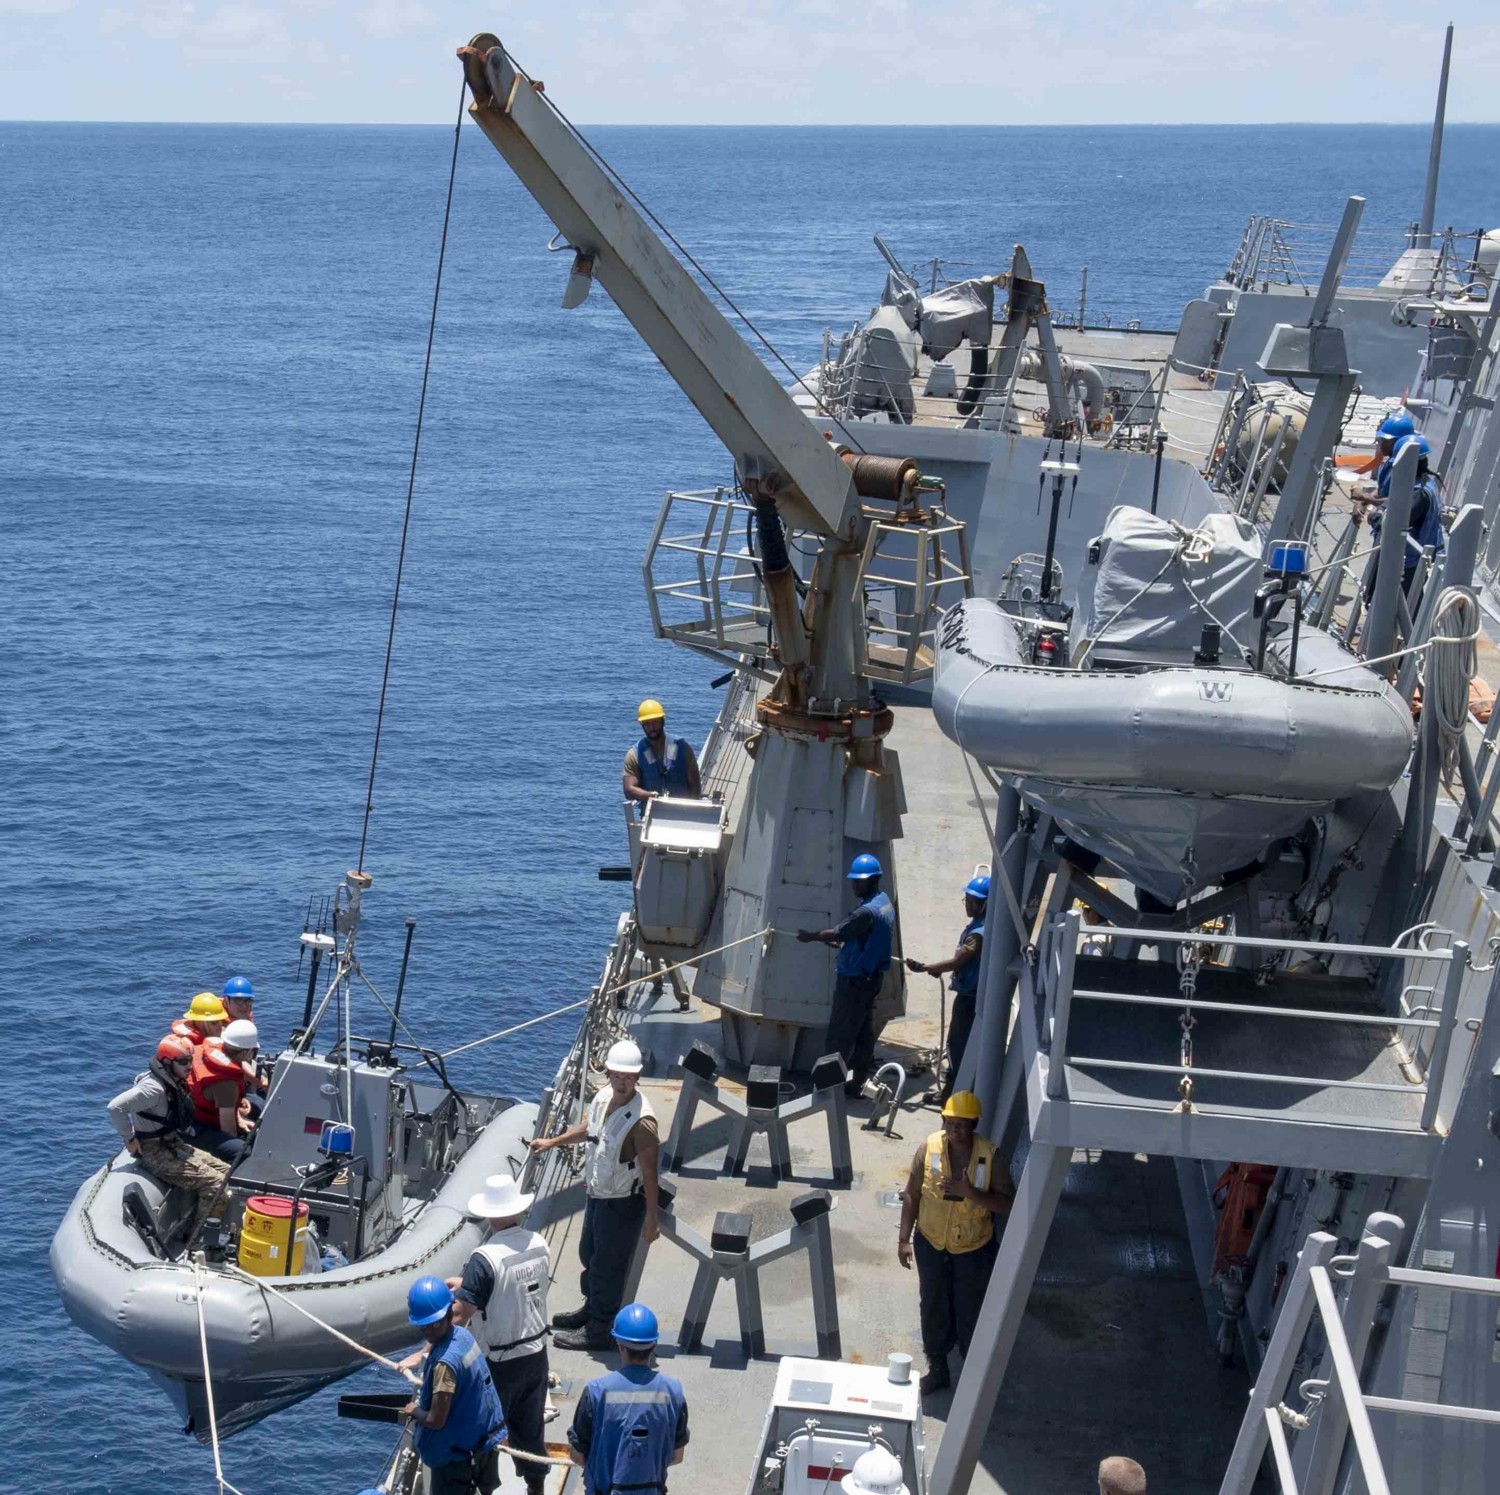 ddg-100 uss kidd arleigh burke class guided missile destroyer aegis us navy small boat crane 50